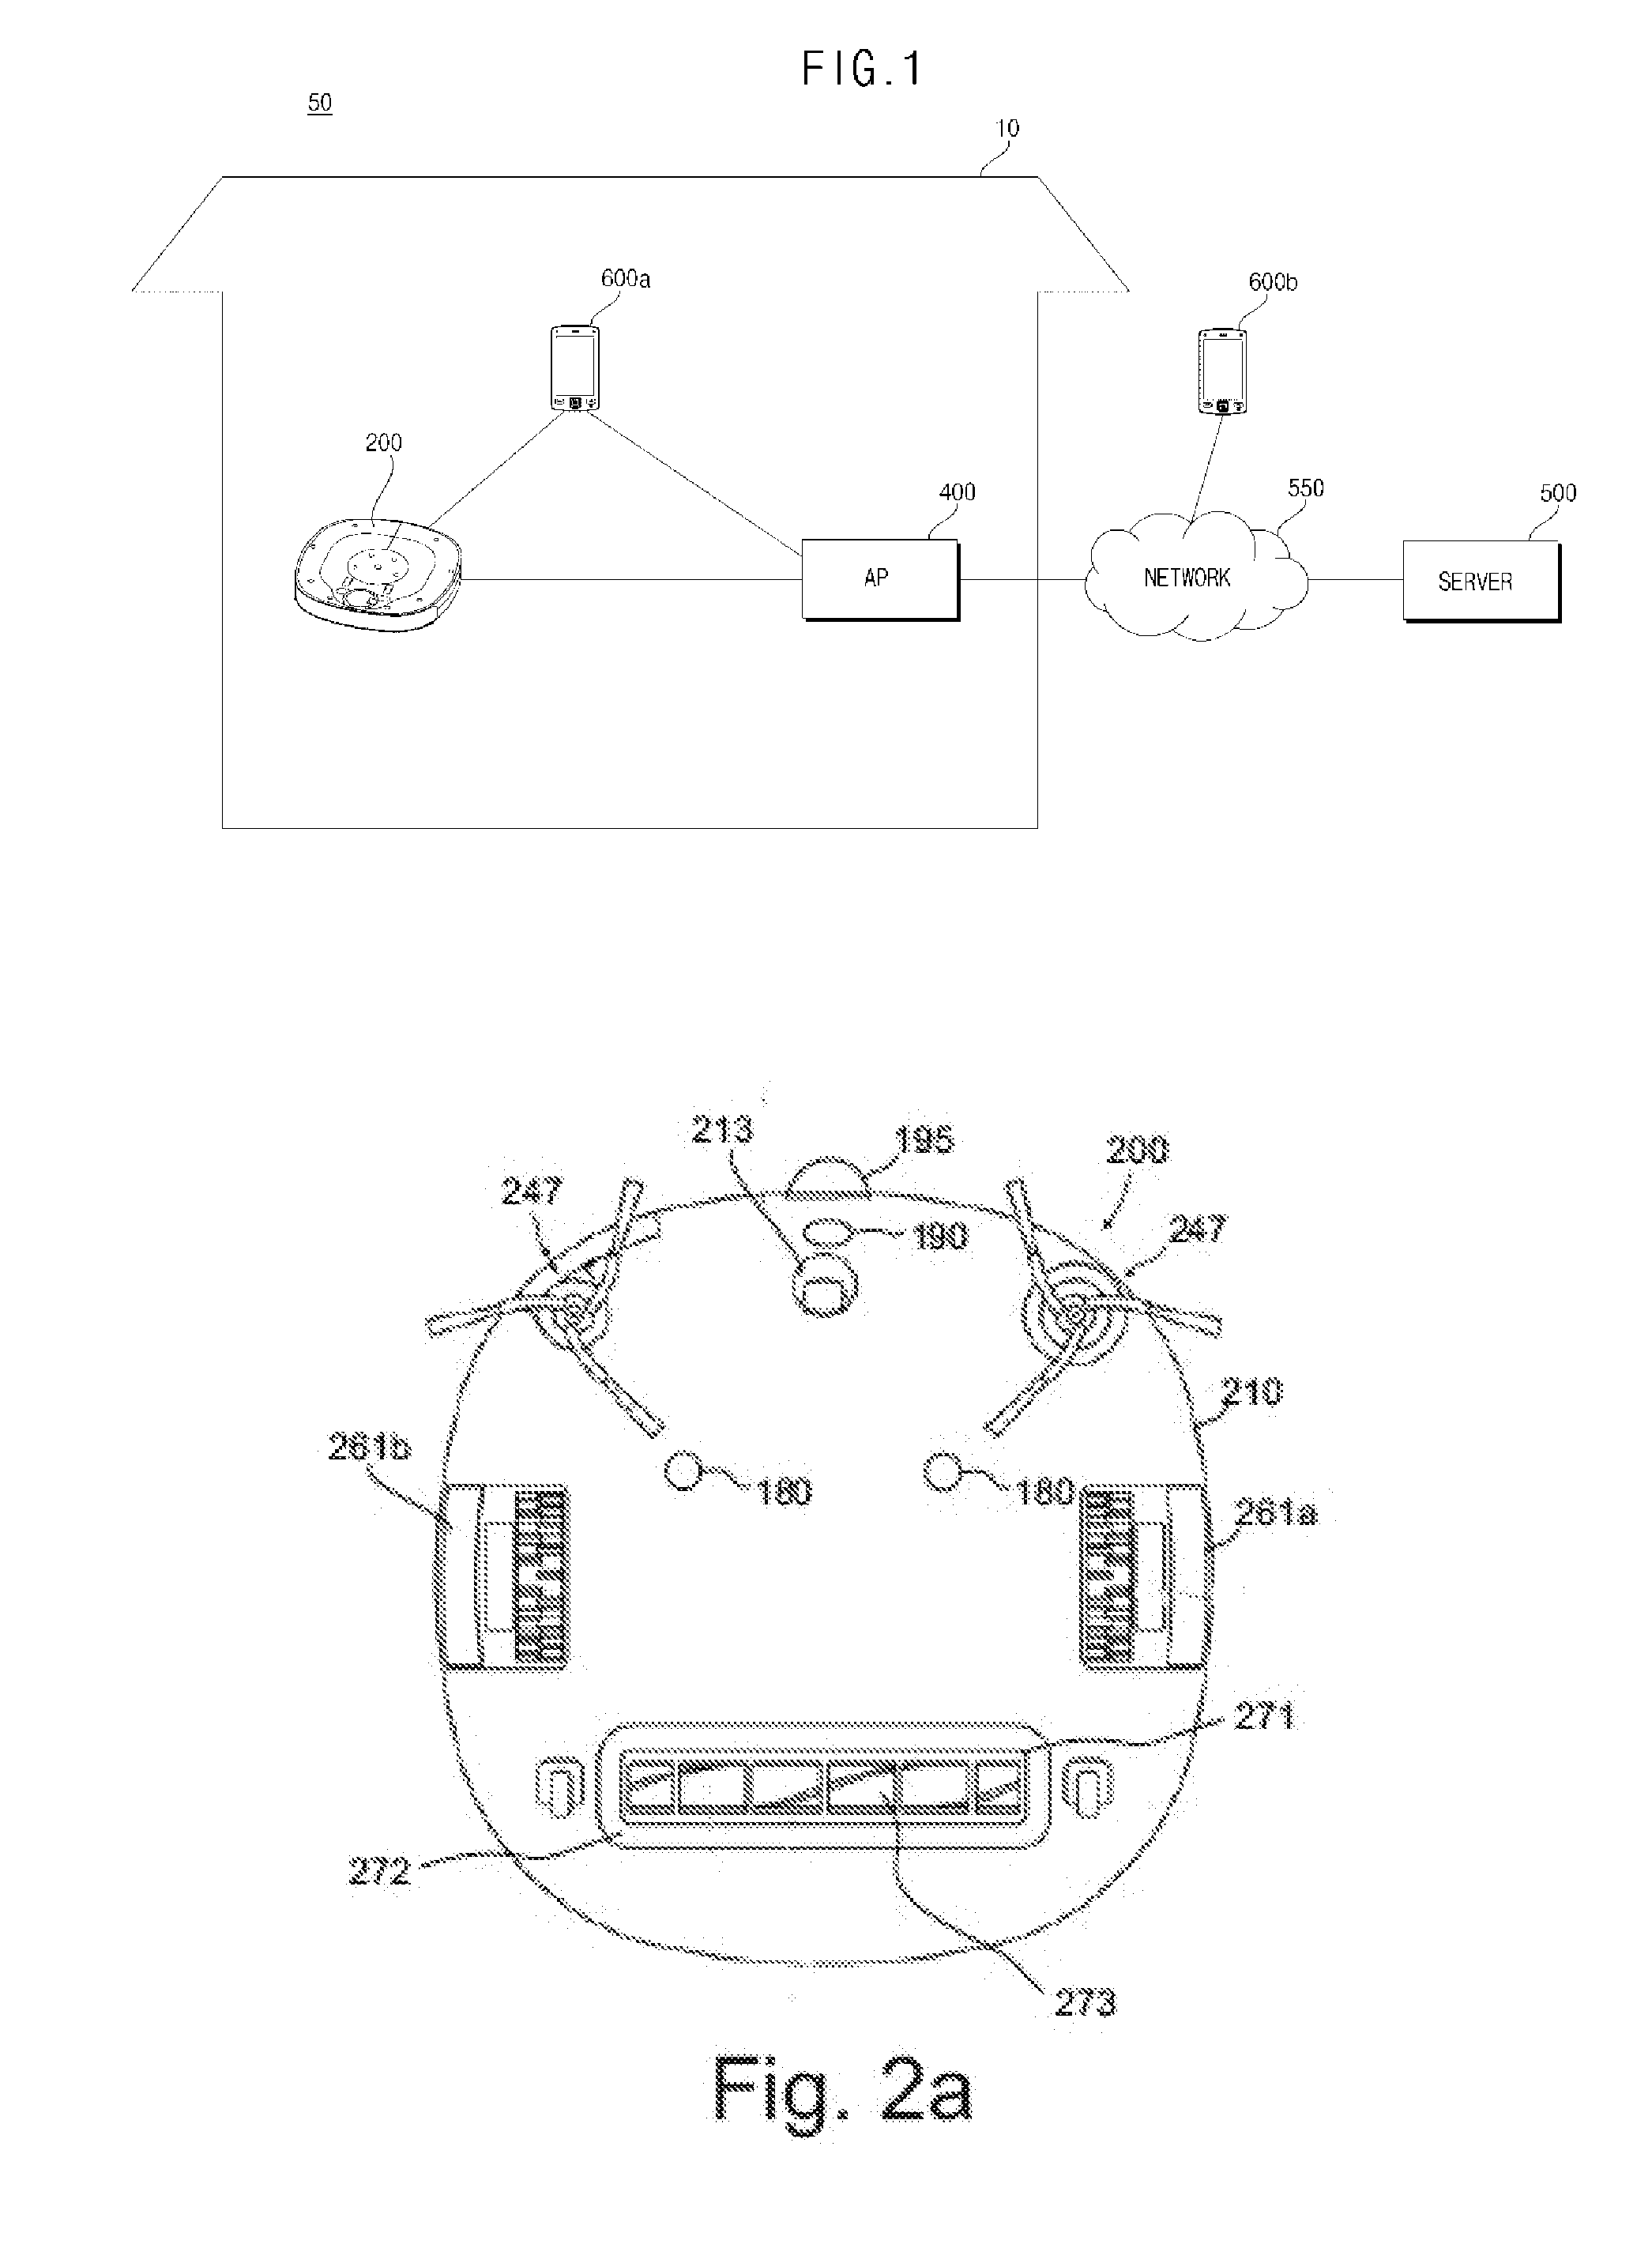 Robot cleaner, robot cleaning system having the same, and method for operating a robot cleaner